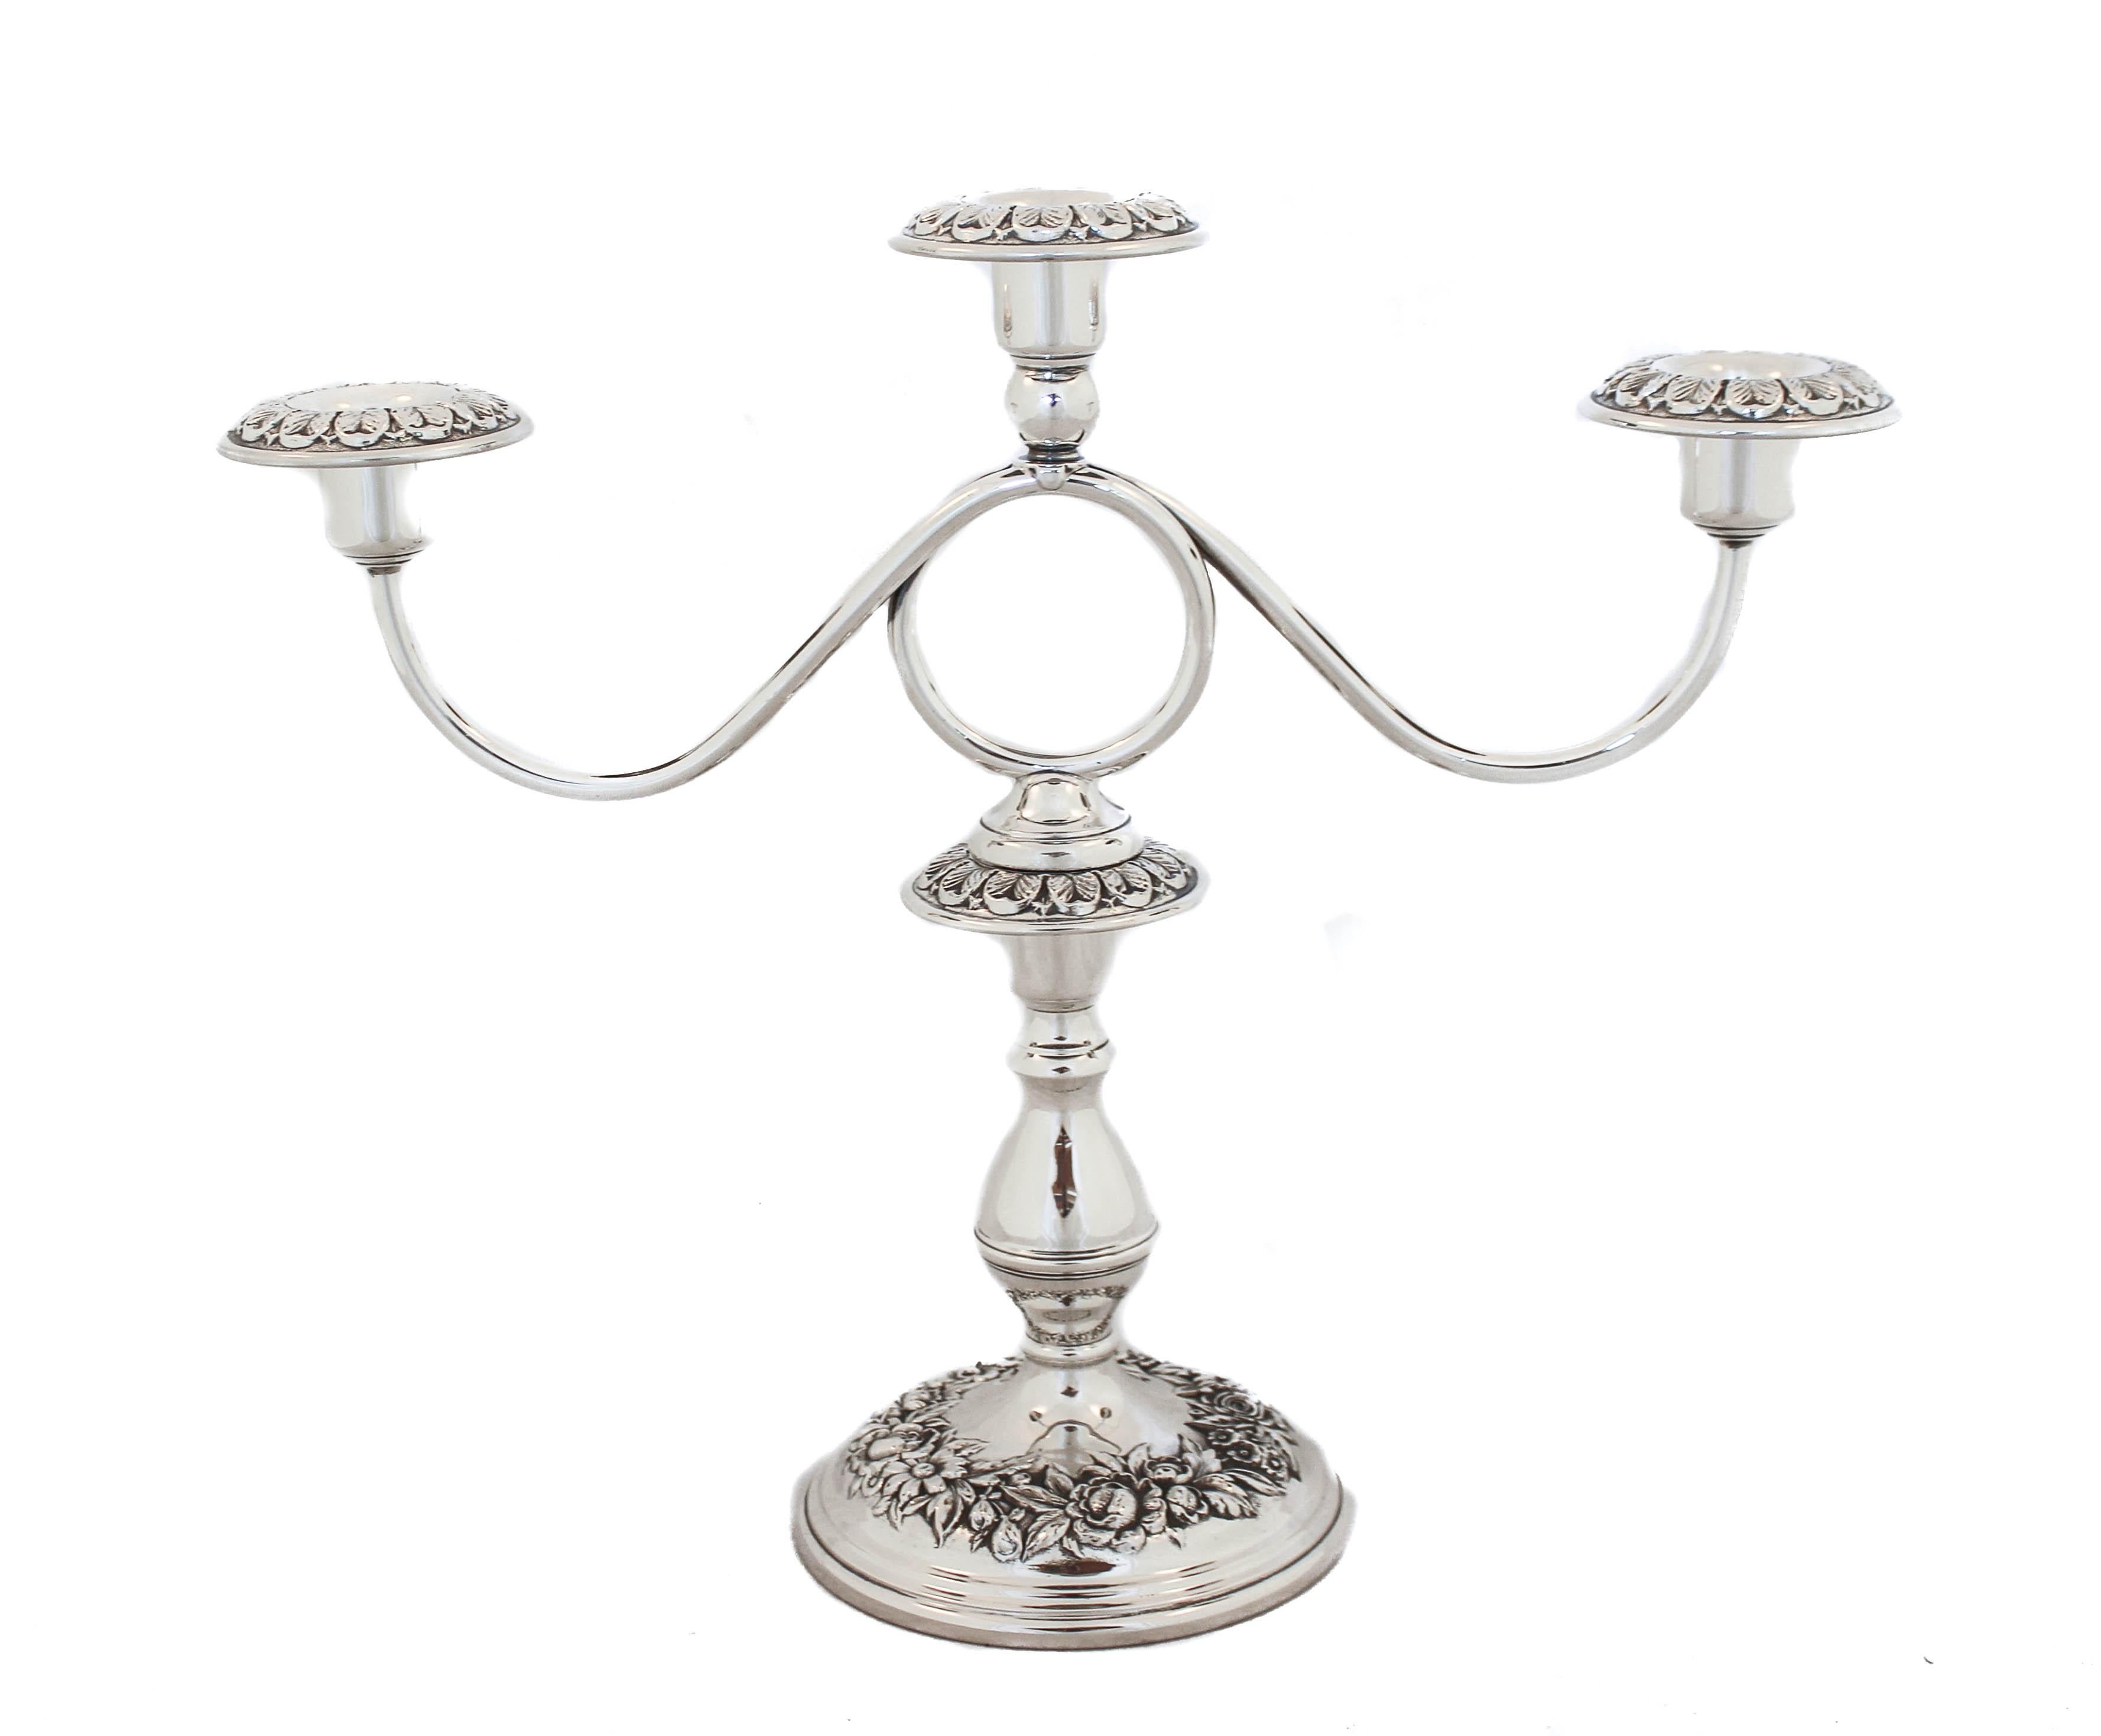 We are proud to offer you this pair of sterling silver candelabras in the “Repousse” pattern by S. Kirk & Son of Baltimore, Maryland. Each candelabra has three-branches, a total of six lights. Around the base there is a circle of blown out flowers